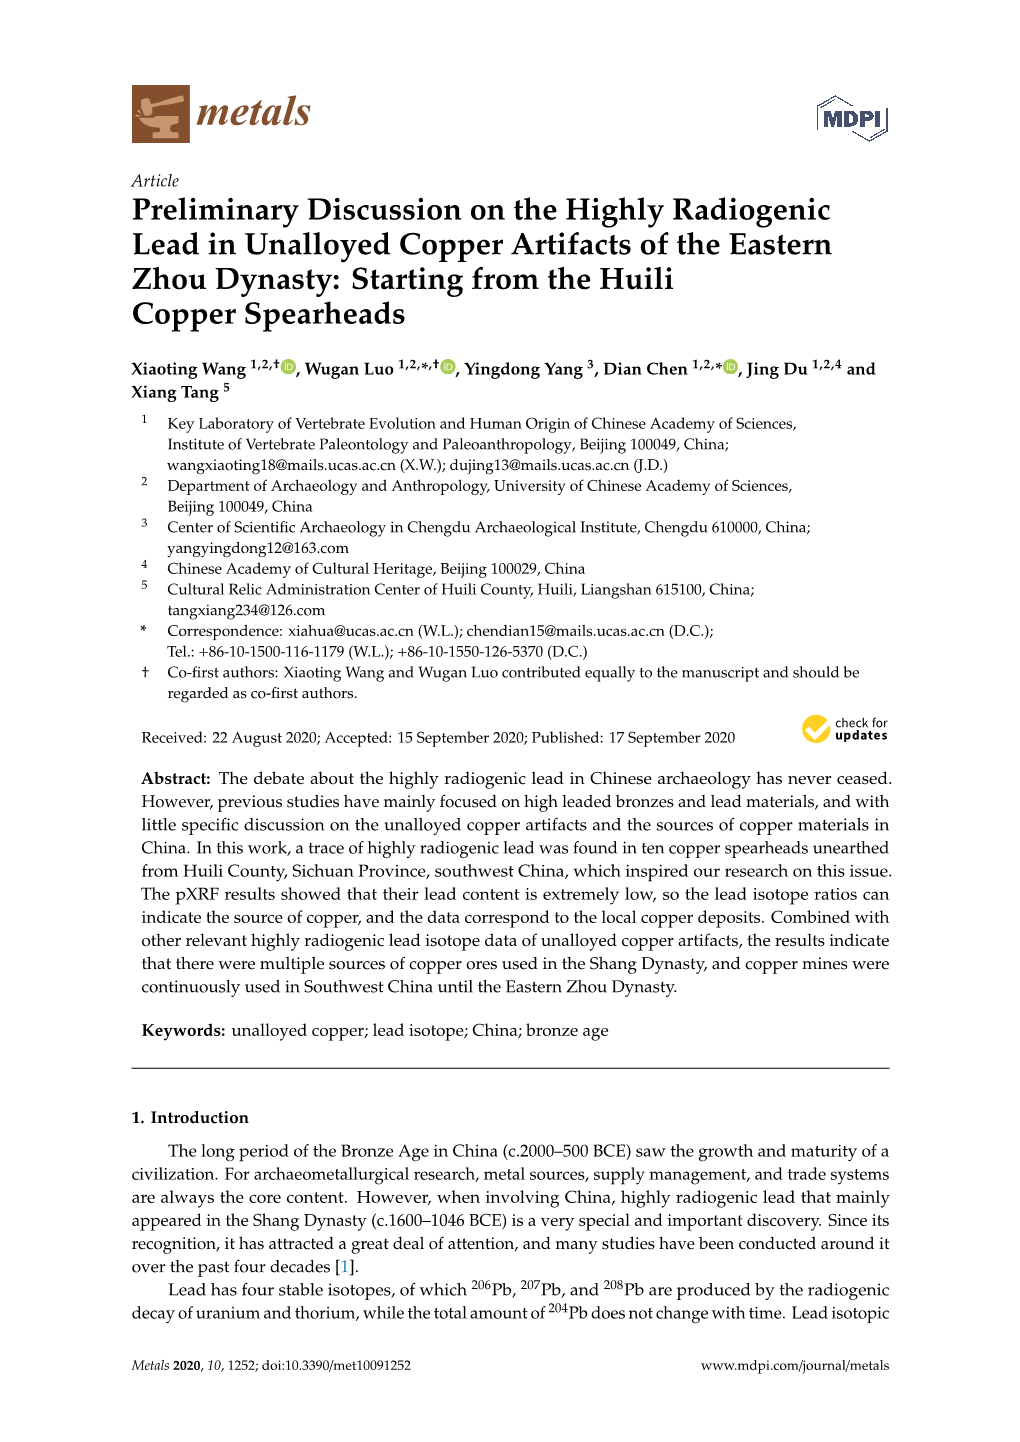 Preliminary Discussion on the Highly Radiogenic Lead in Unalloyed Copper Artifacts of the Eastern Zhou Dynasty: Starting from the Huili Copper Spearheads